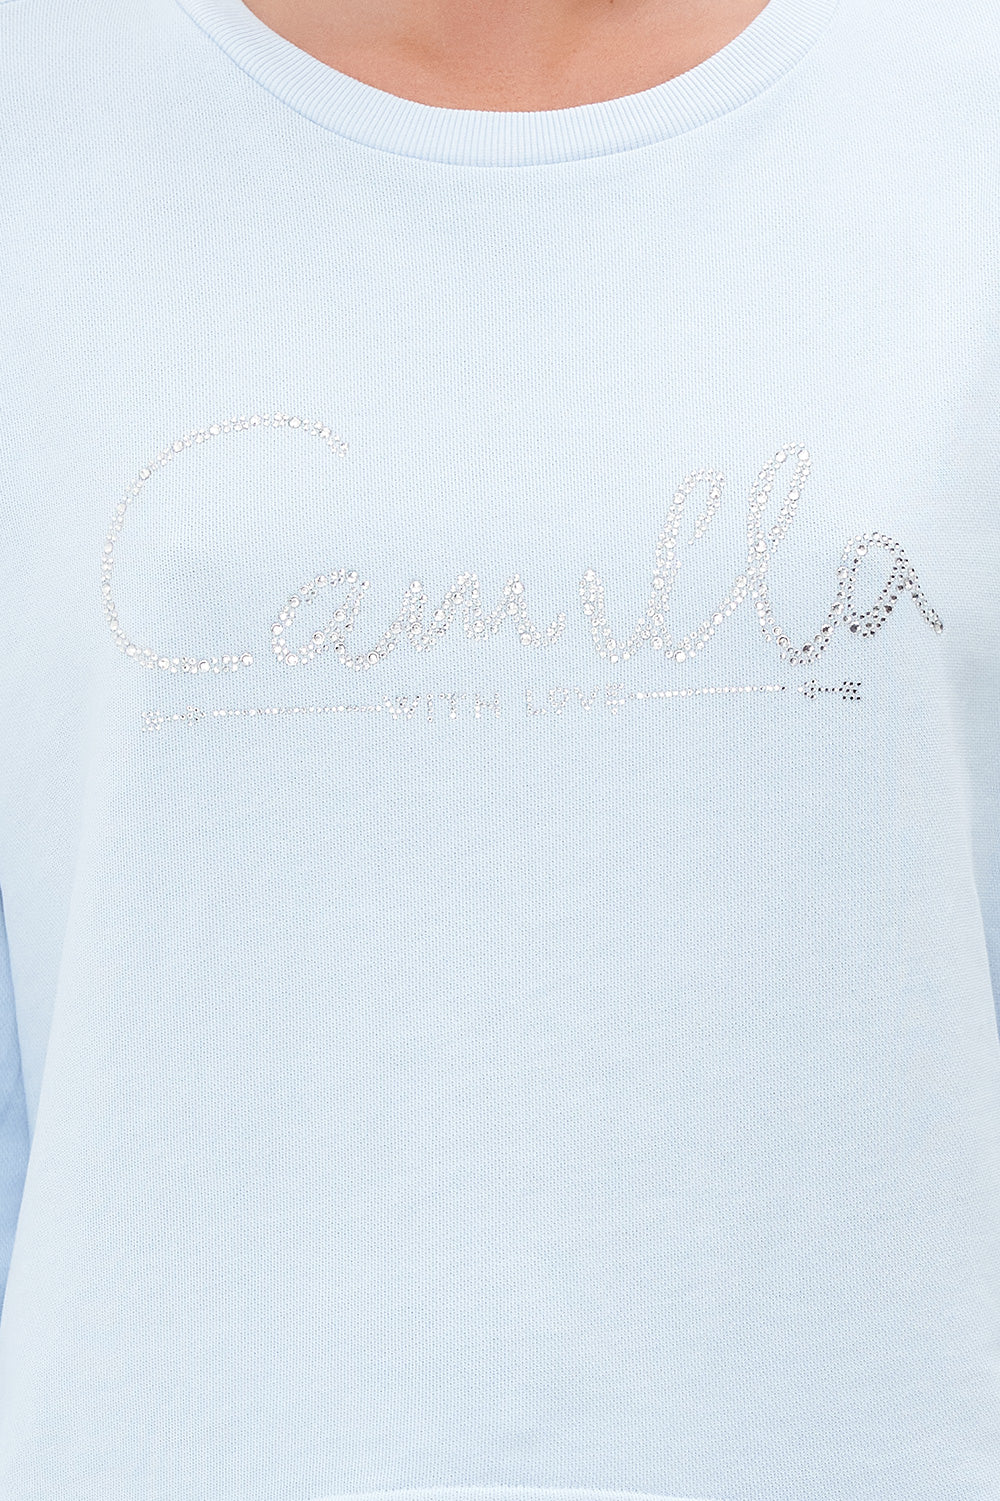 SHORT RELAXED SWEATER LOGO CAPSULE - ICE BLUE